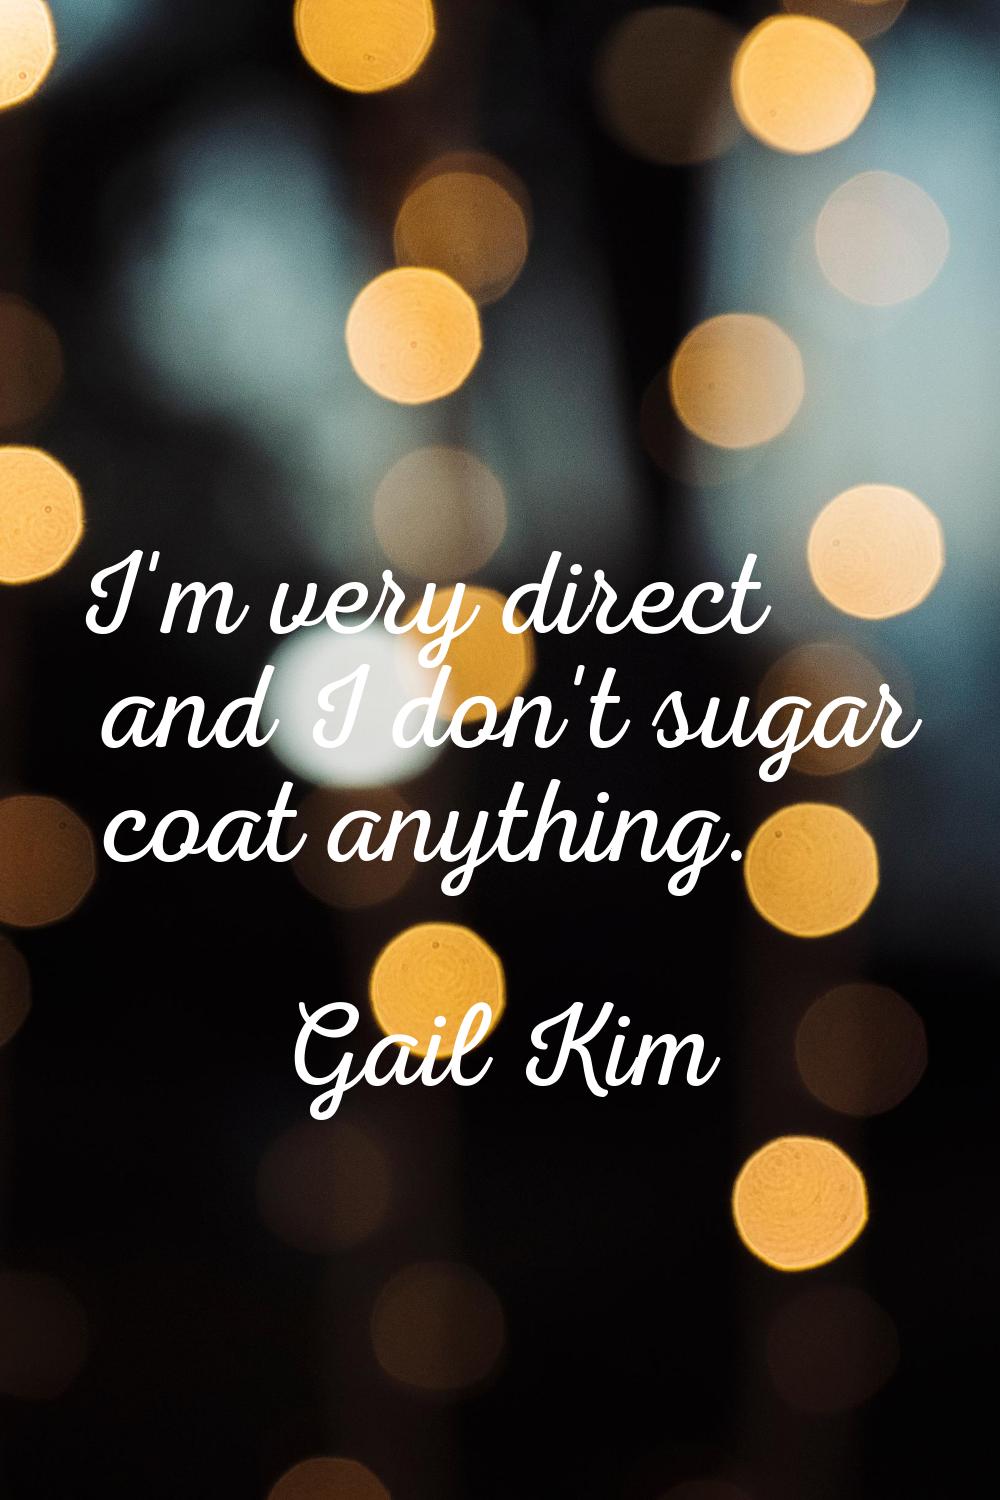 I'm very direct and I don't sugar coat anything.